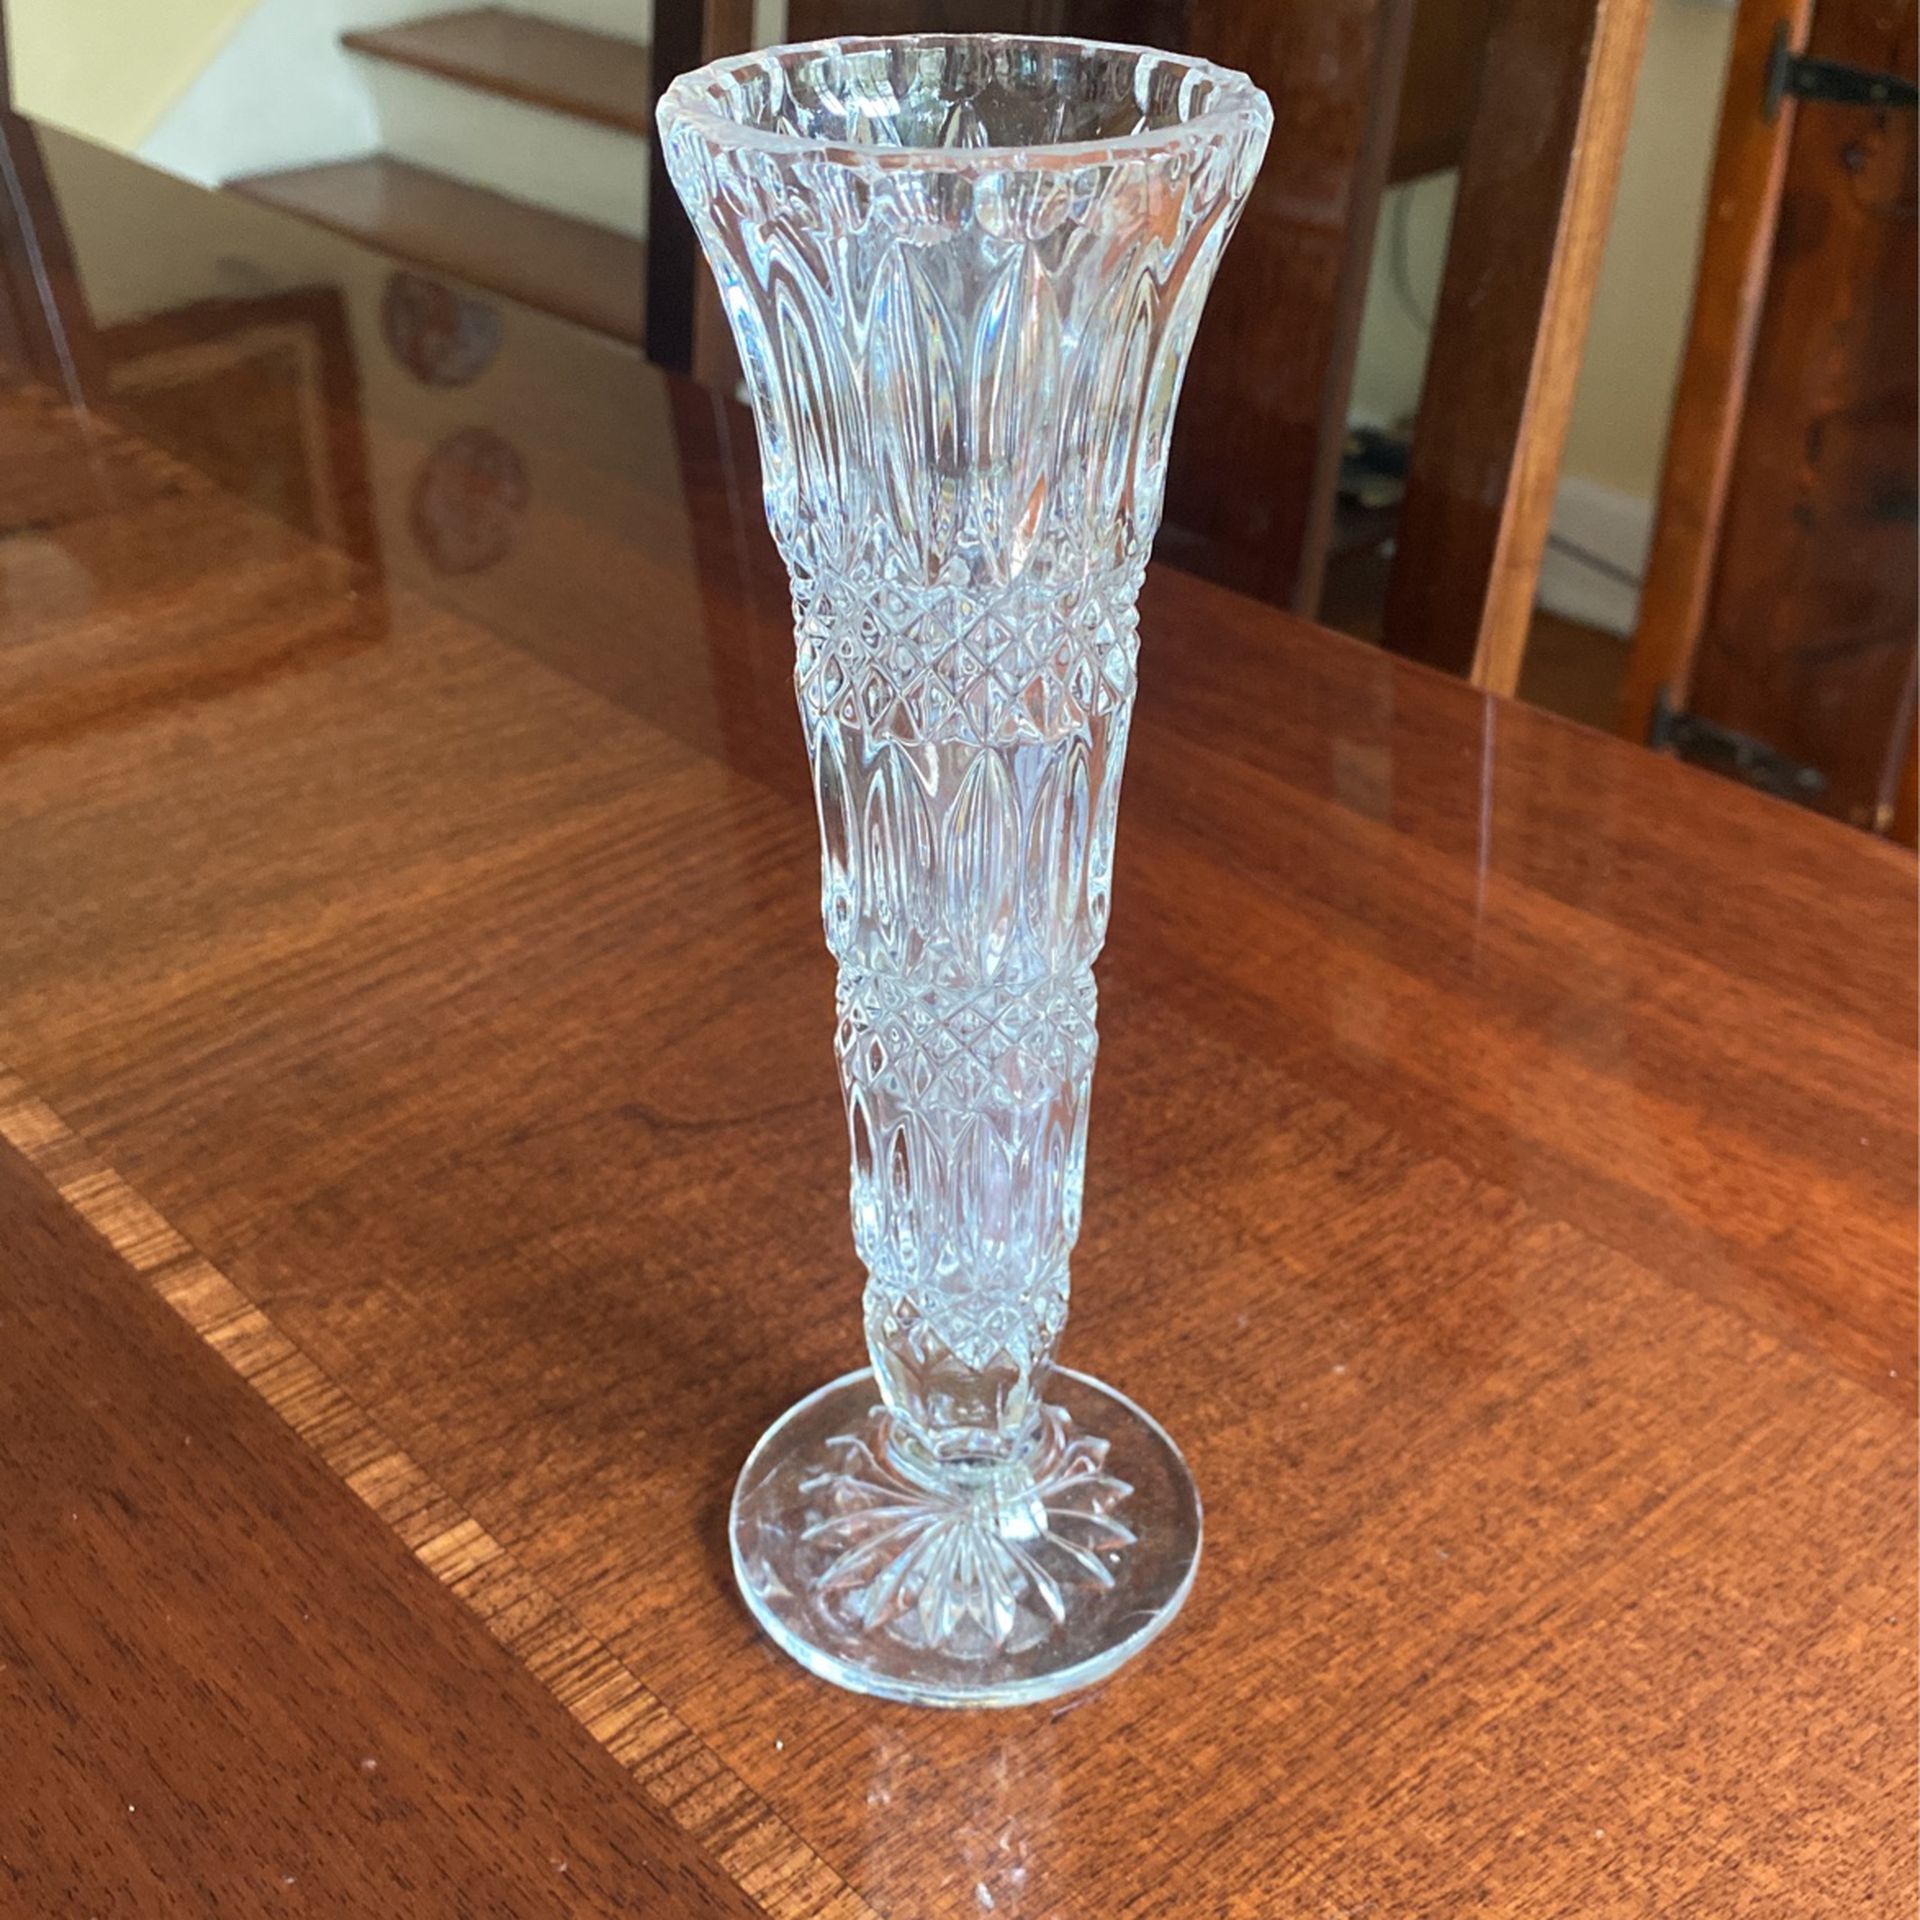 Lovely clear crystal glass 8 inch tall table vase